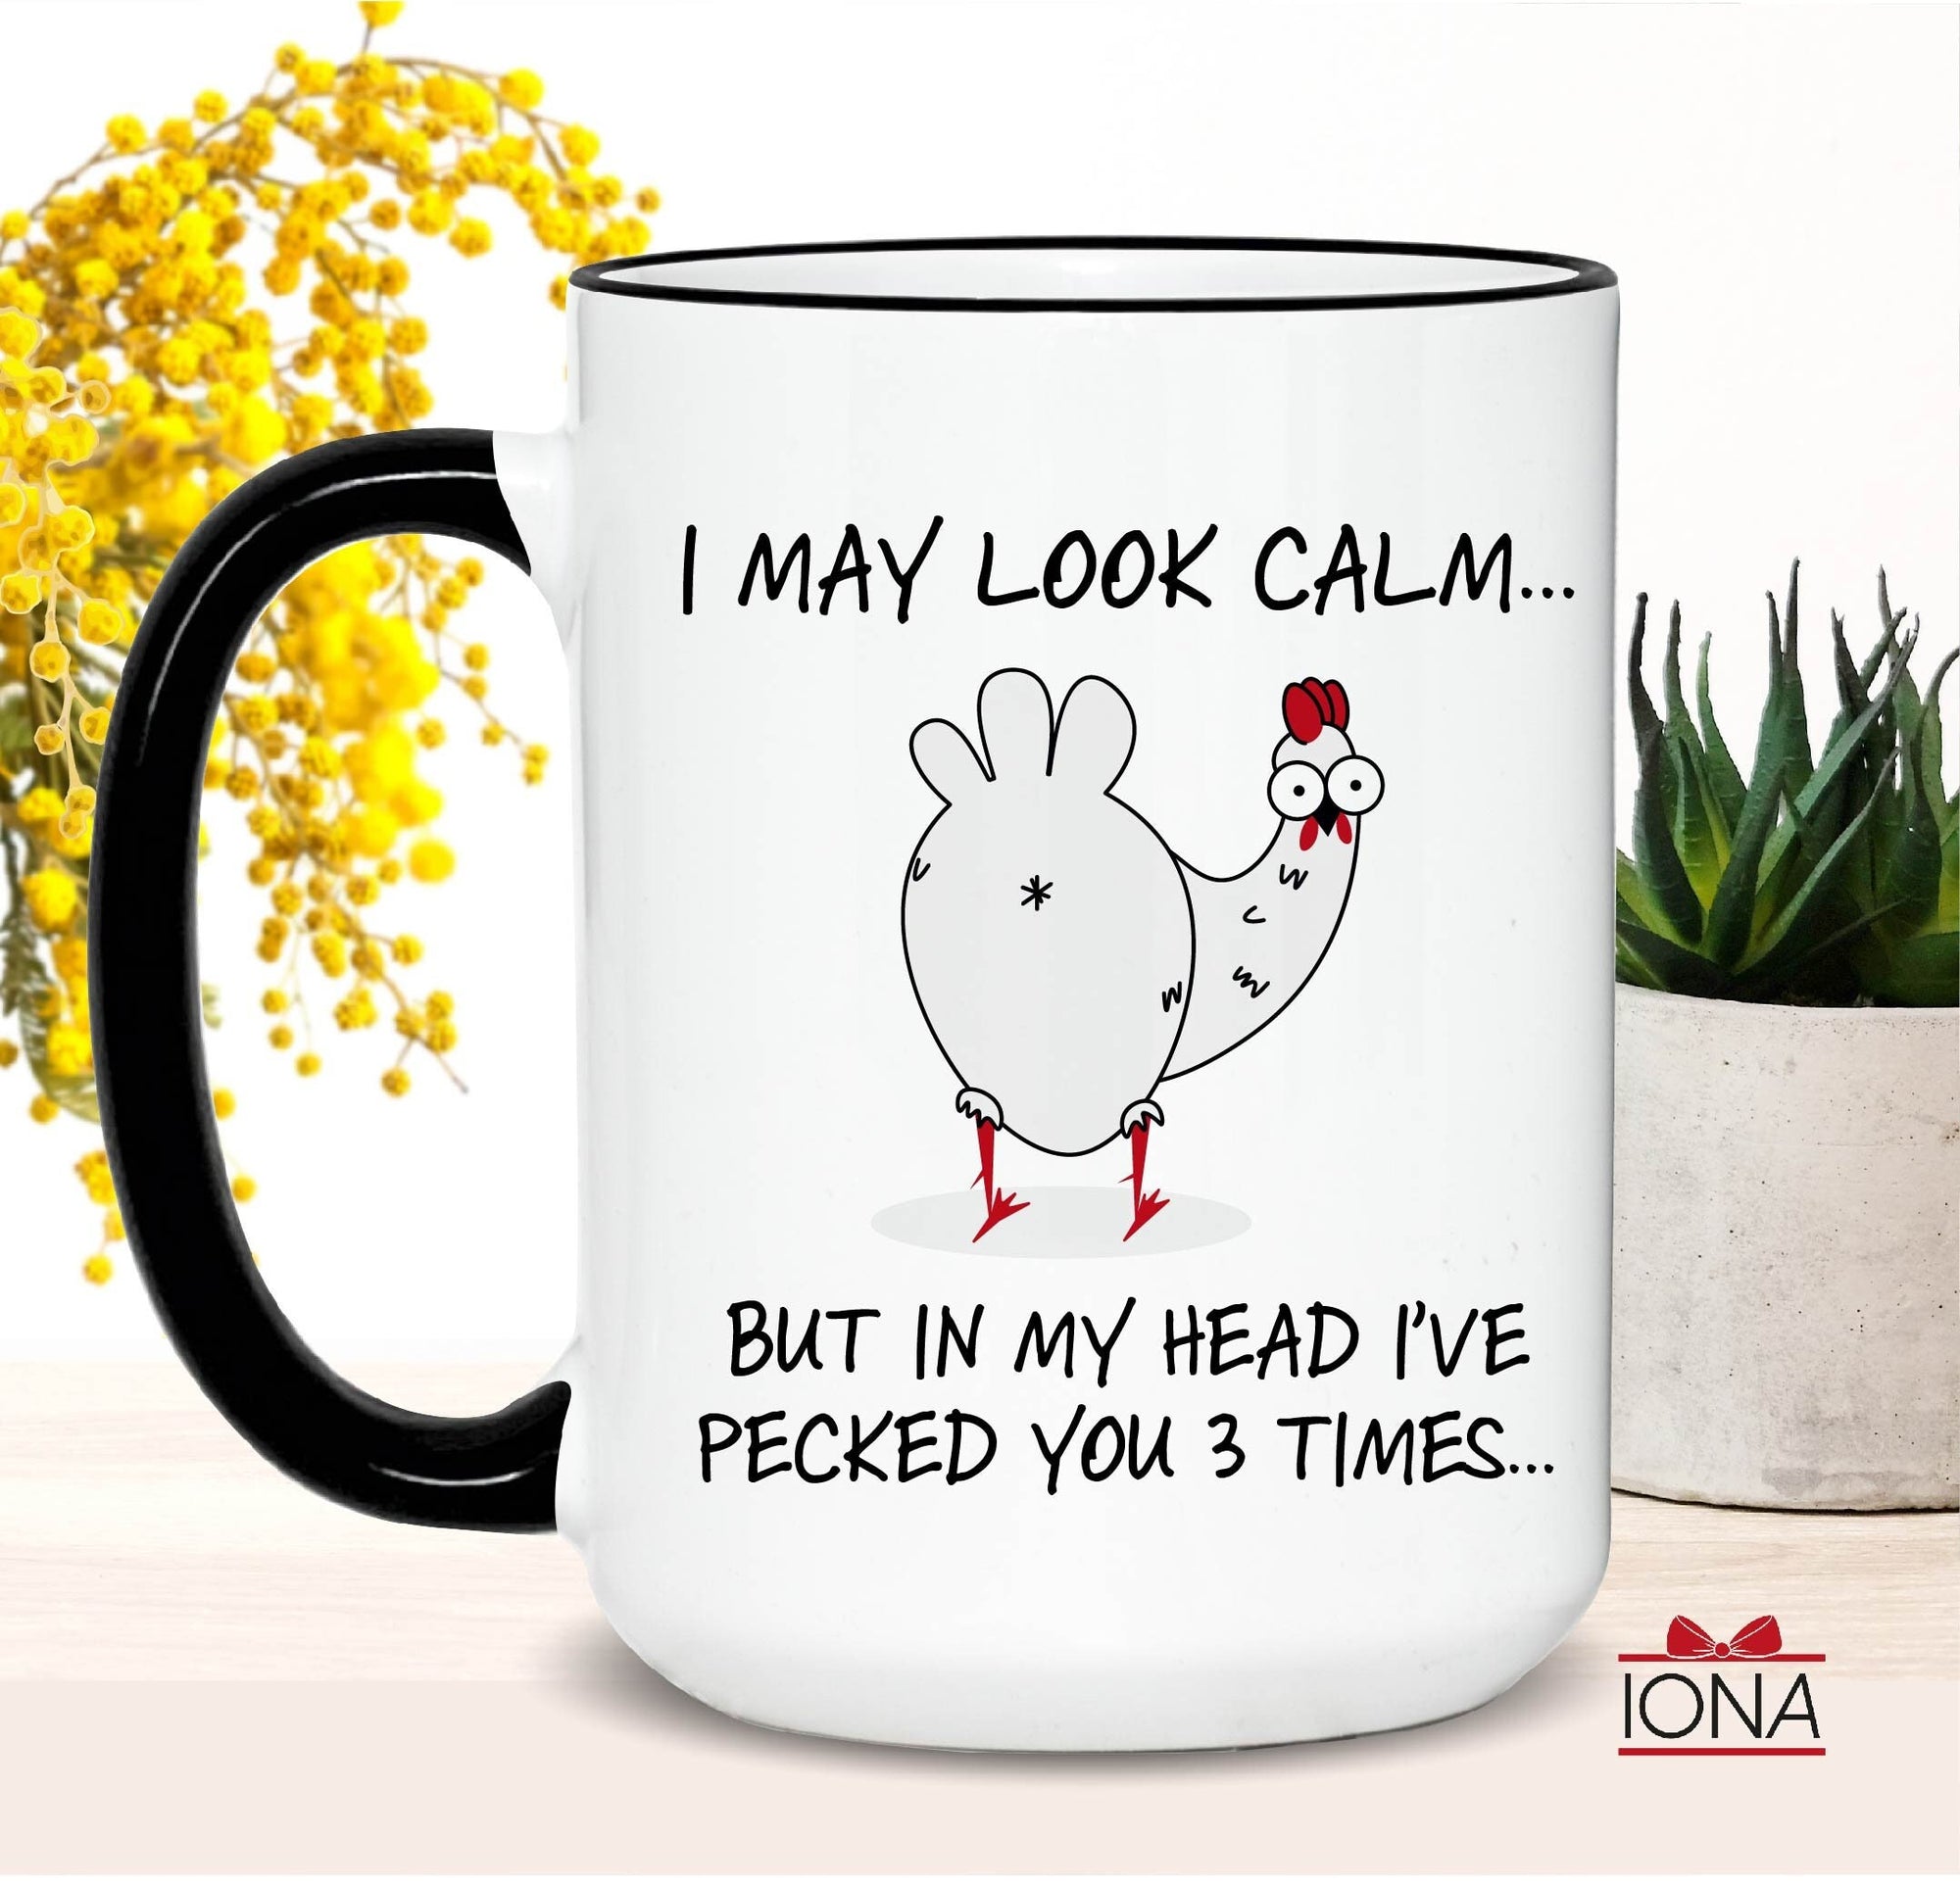 Funny Rooster Coffee Mug, Mugs with Sayings, Coworker Gift, I May Look Calm but in my head I've pecked you 3 times, funny birthday gift